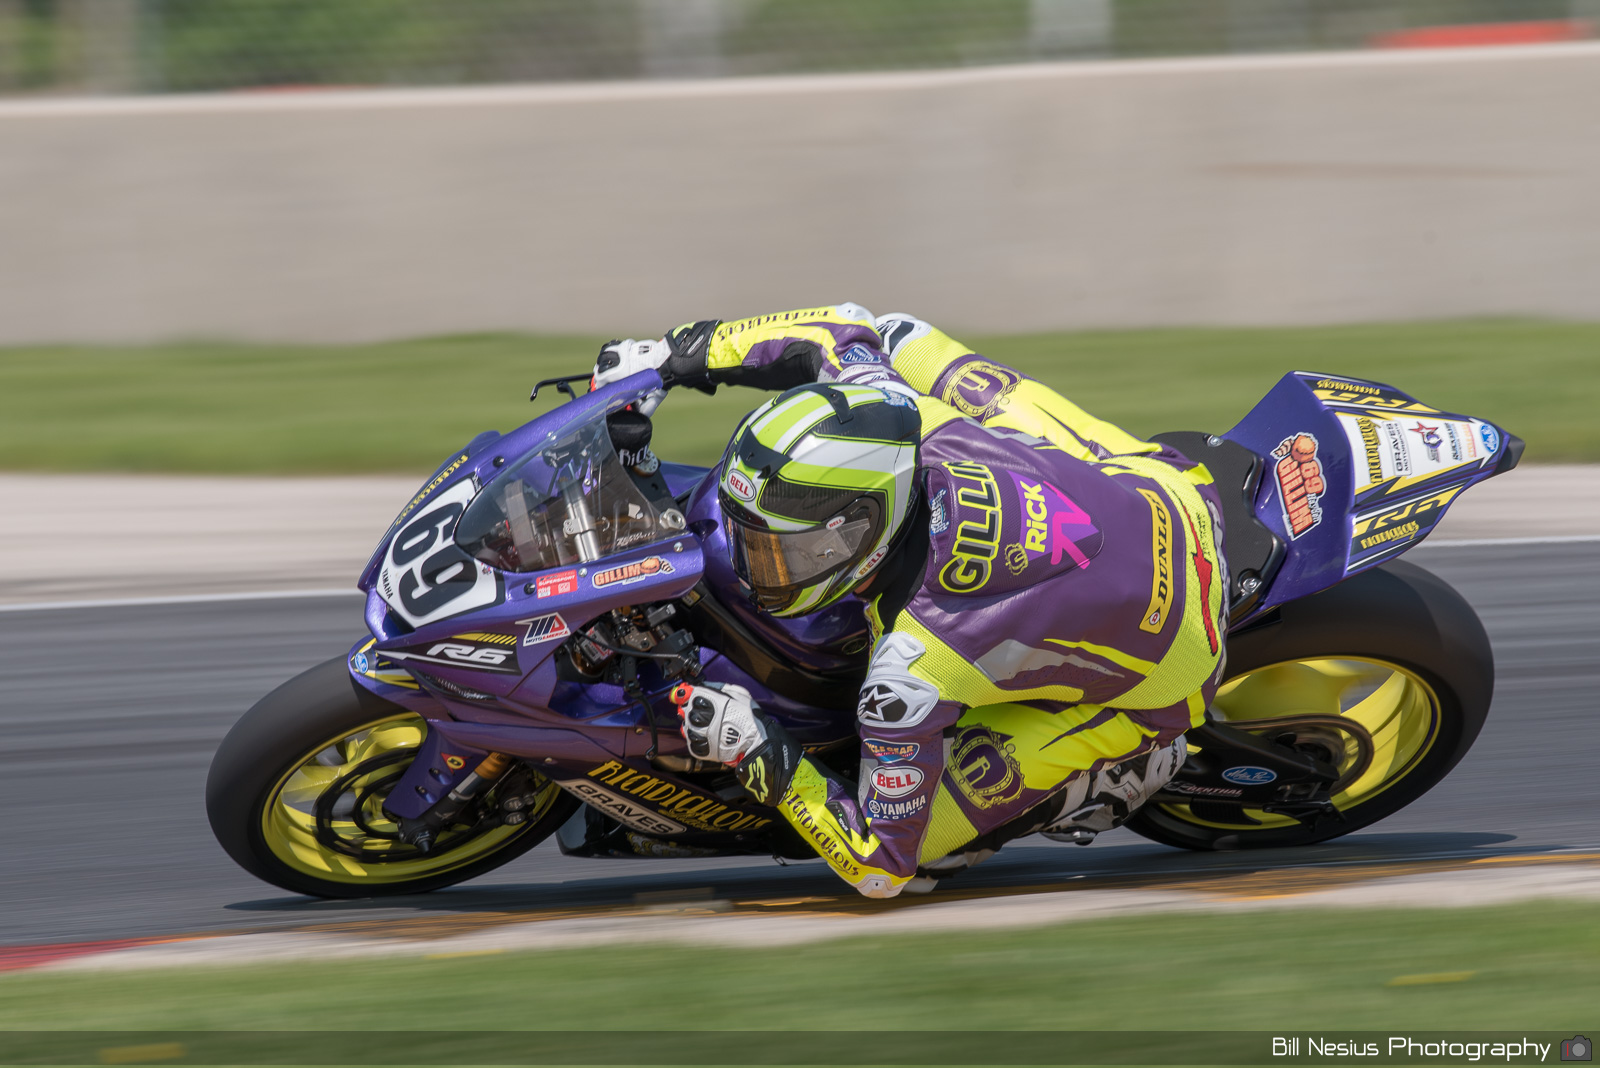 Hayden Gillim on the Number 69 Rickdiculous Racing Yamaha YZF-R6 / DSC_6966 / 3